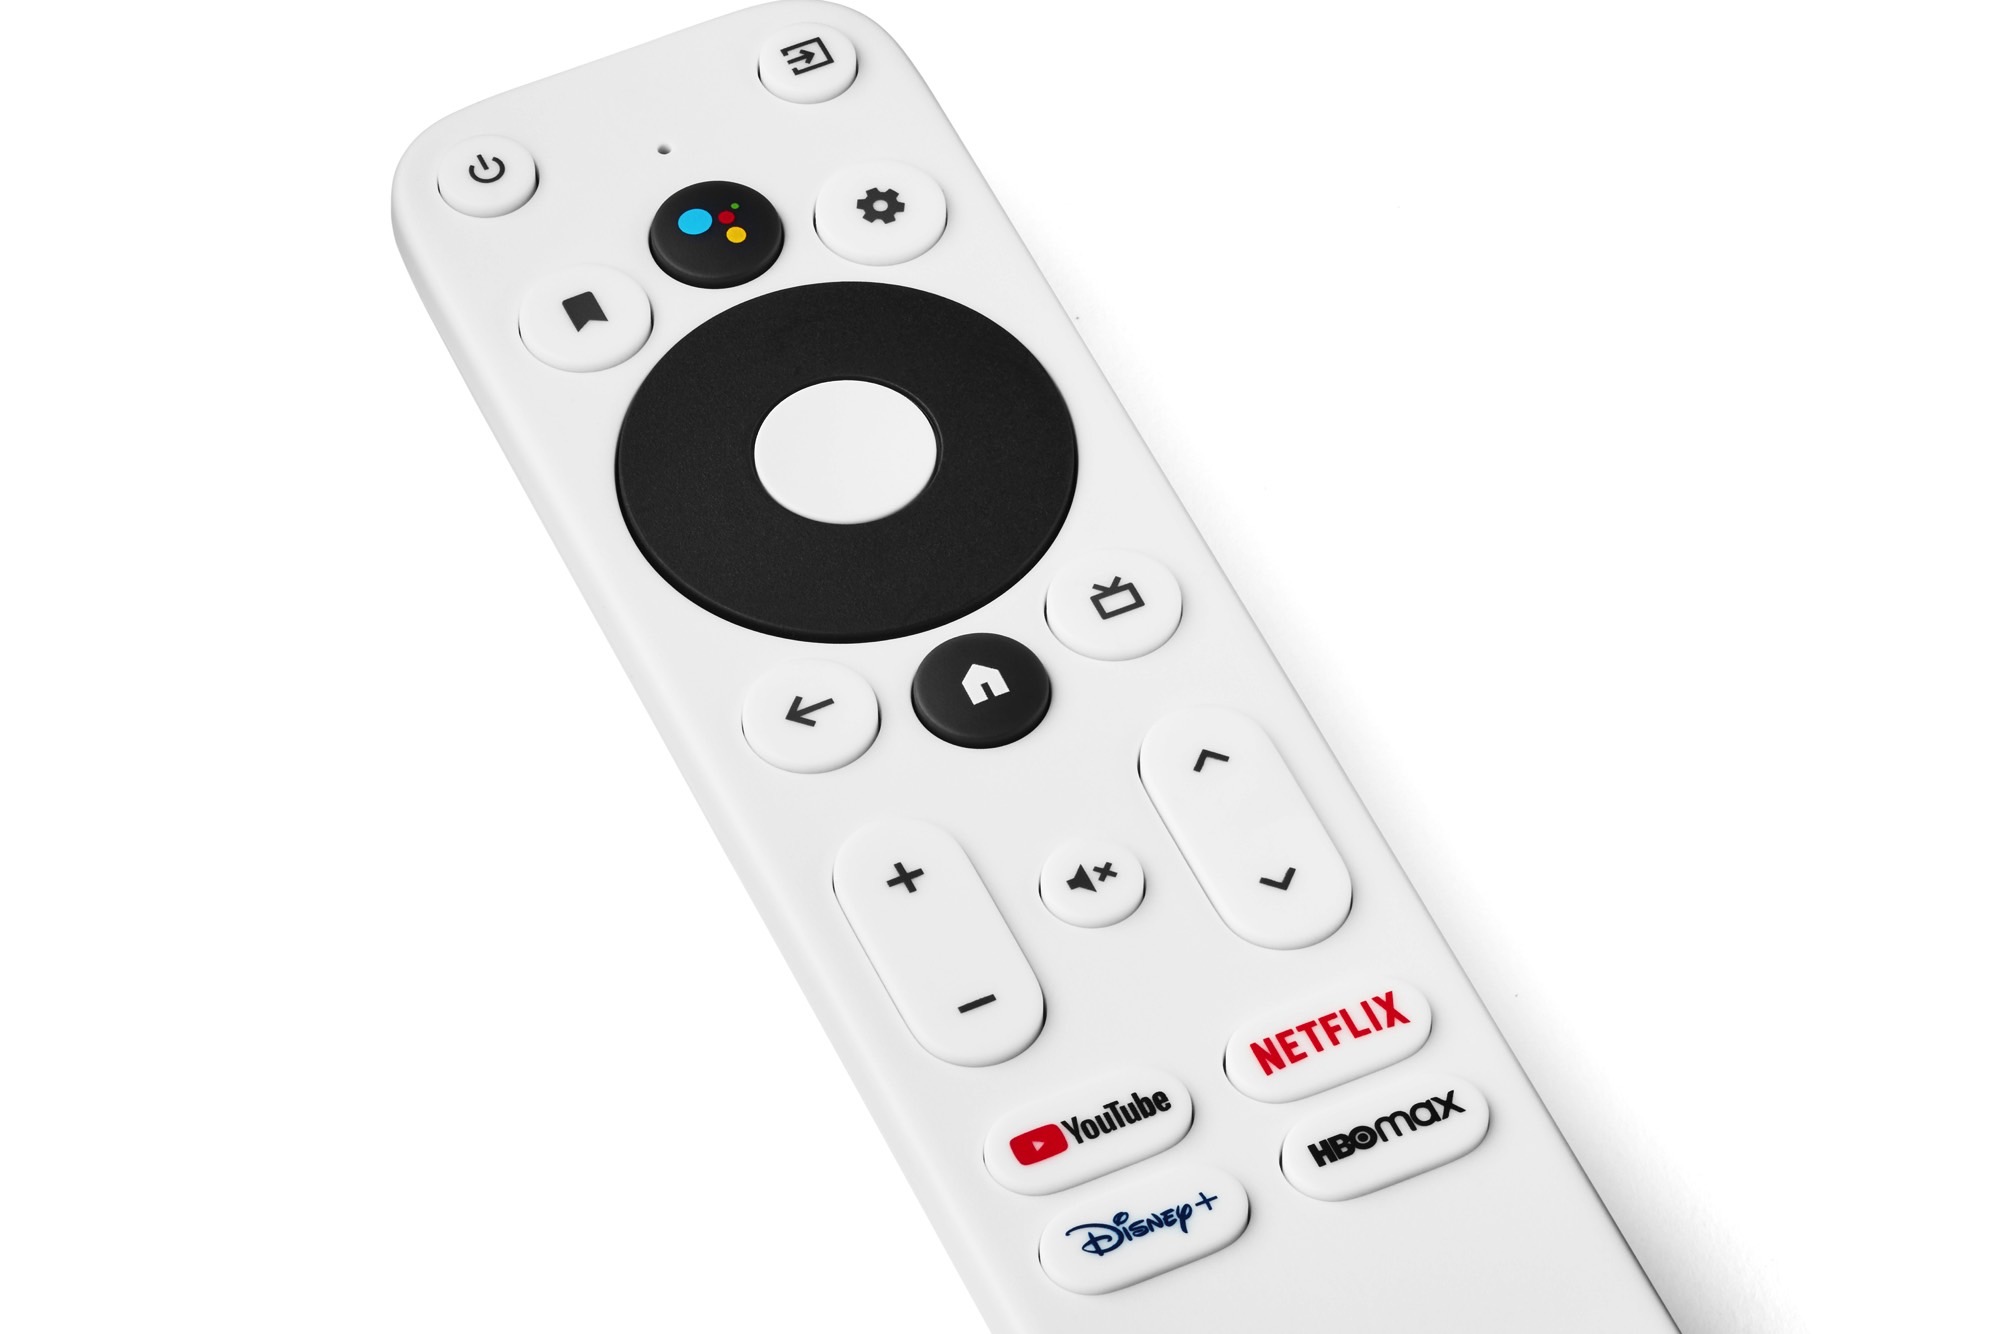 Walmart onn. Android TV streaming device remote control